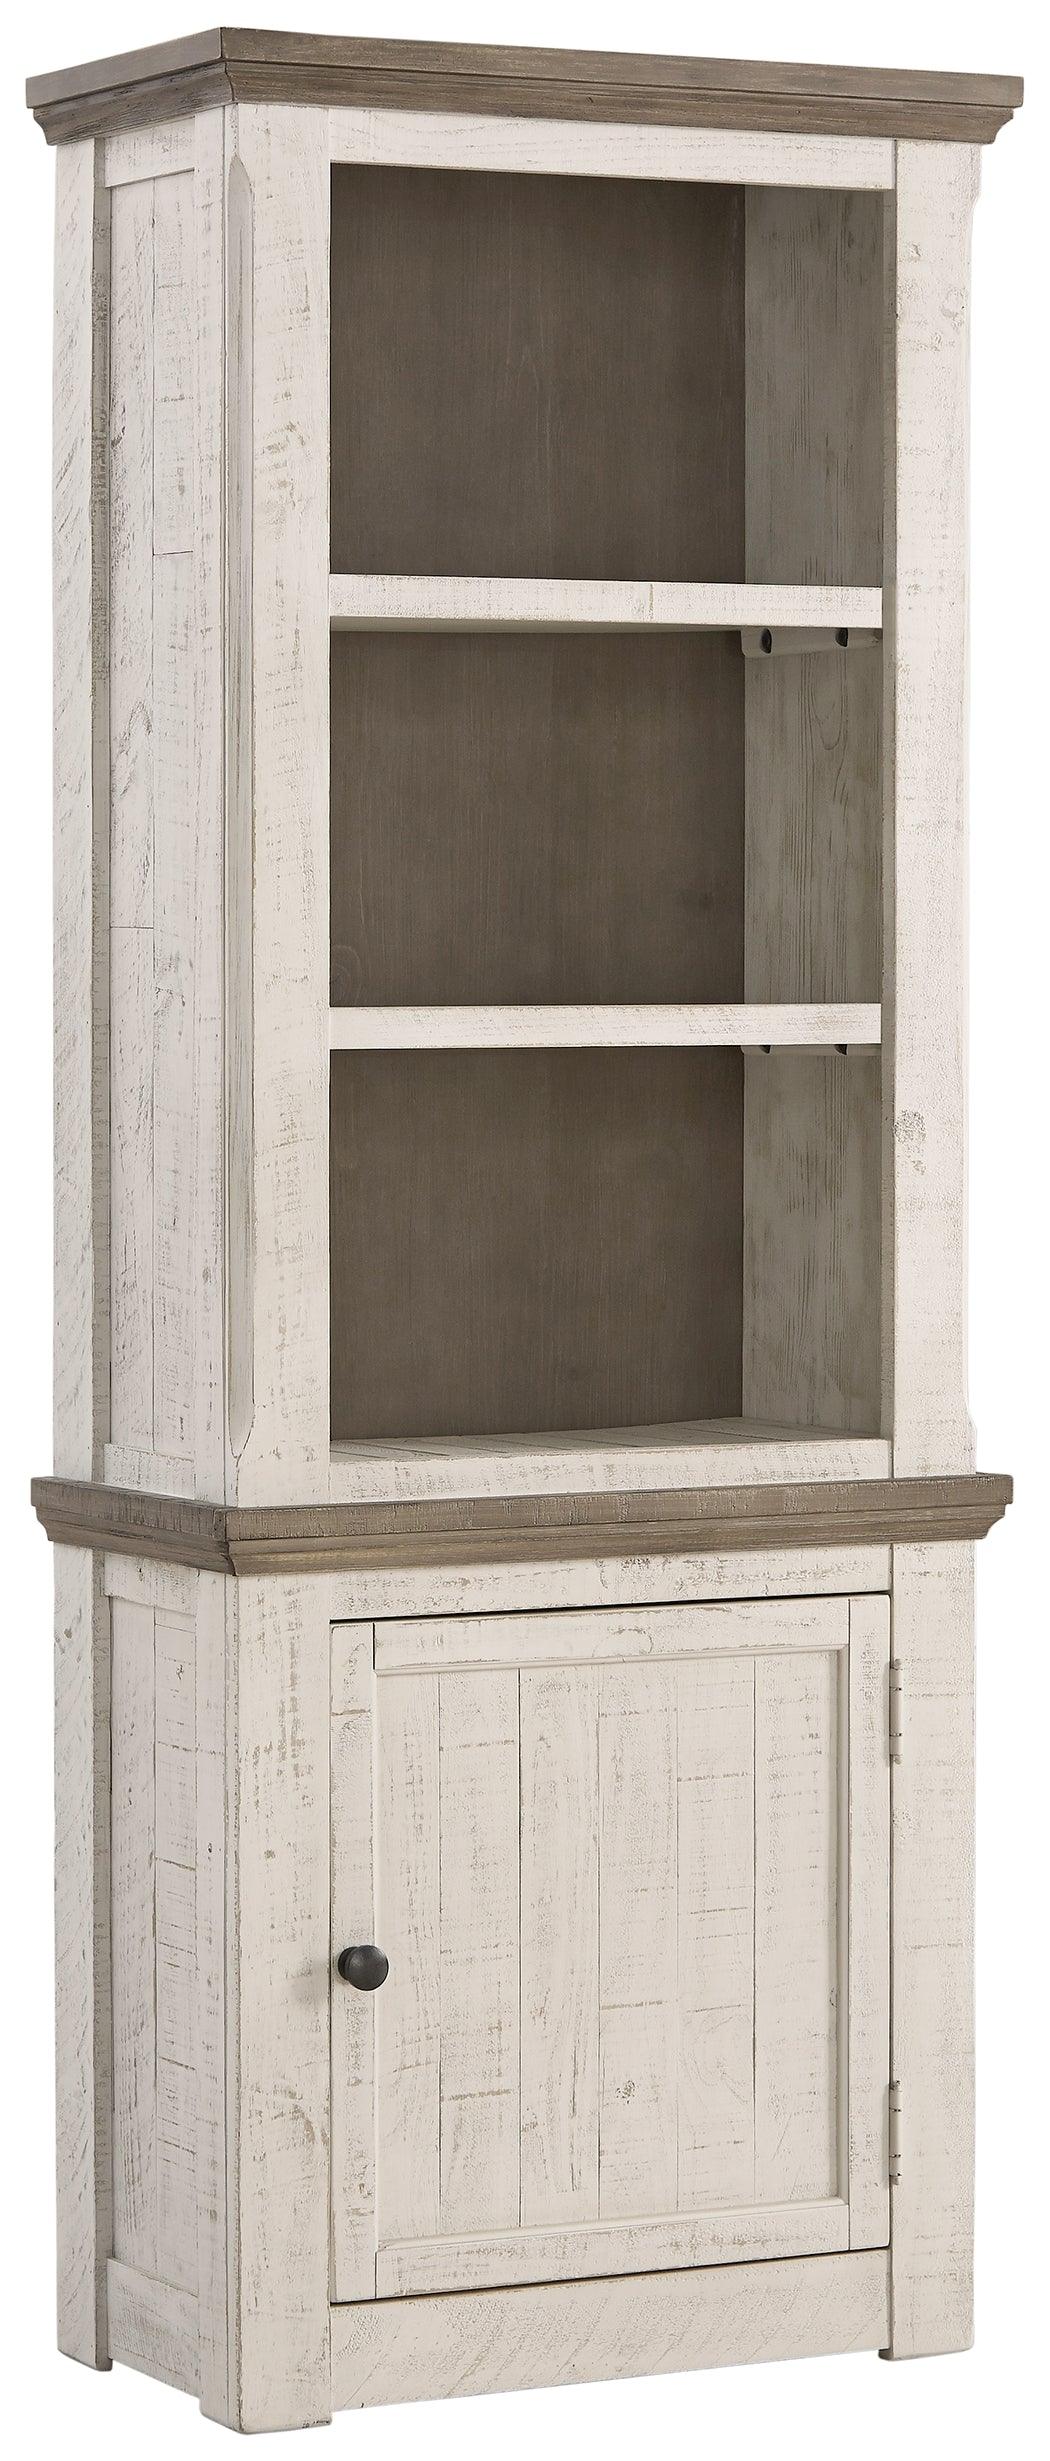 Havalance Two-tone Right Pier Cabinet